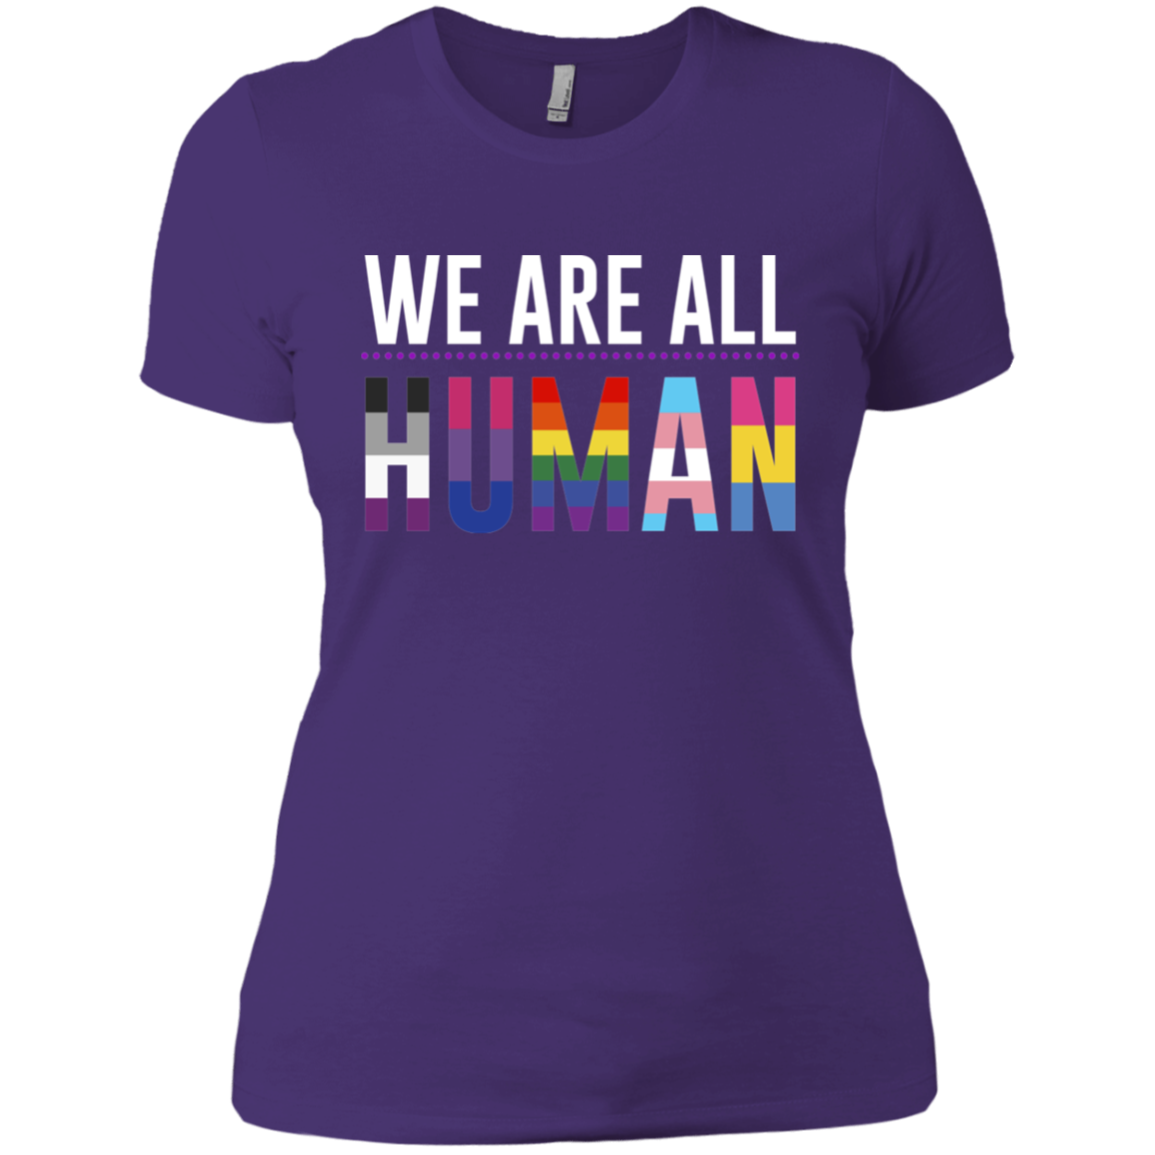 We Are All Human purple T Shirt for women, half sleeves round neck tshiart for women